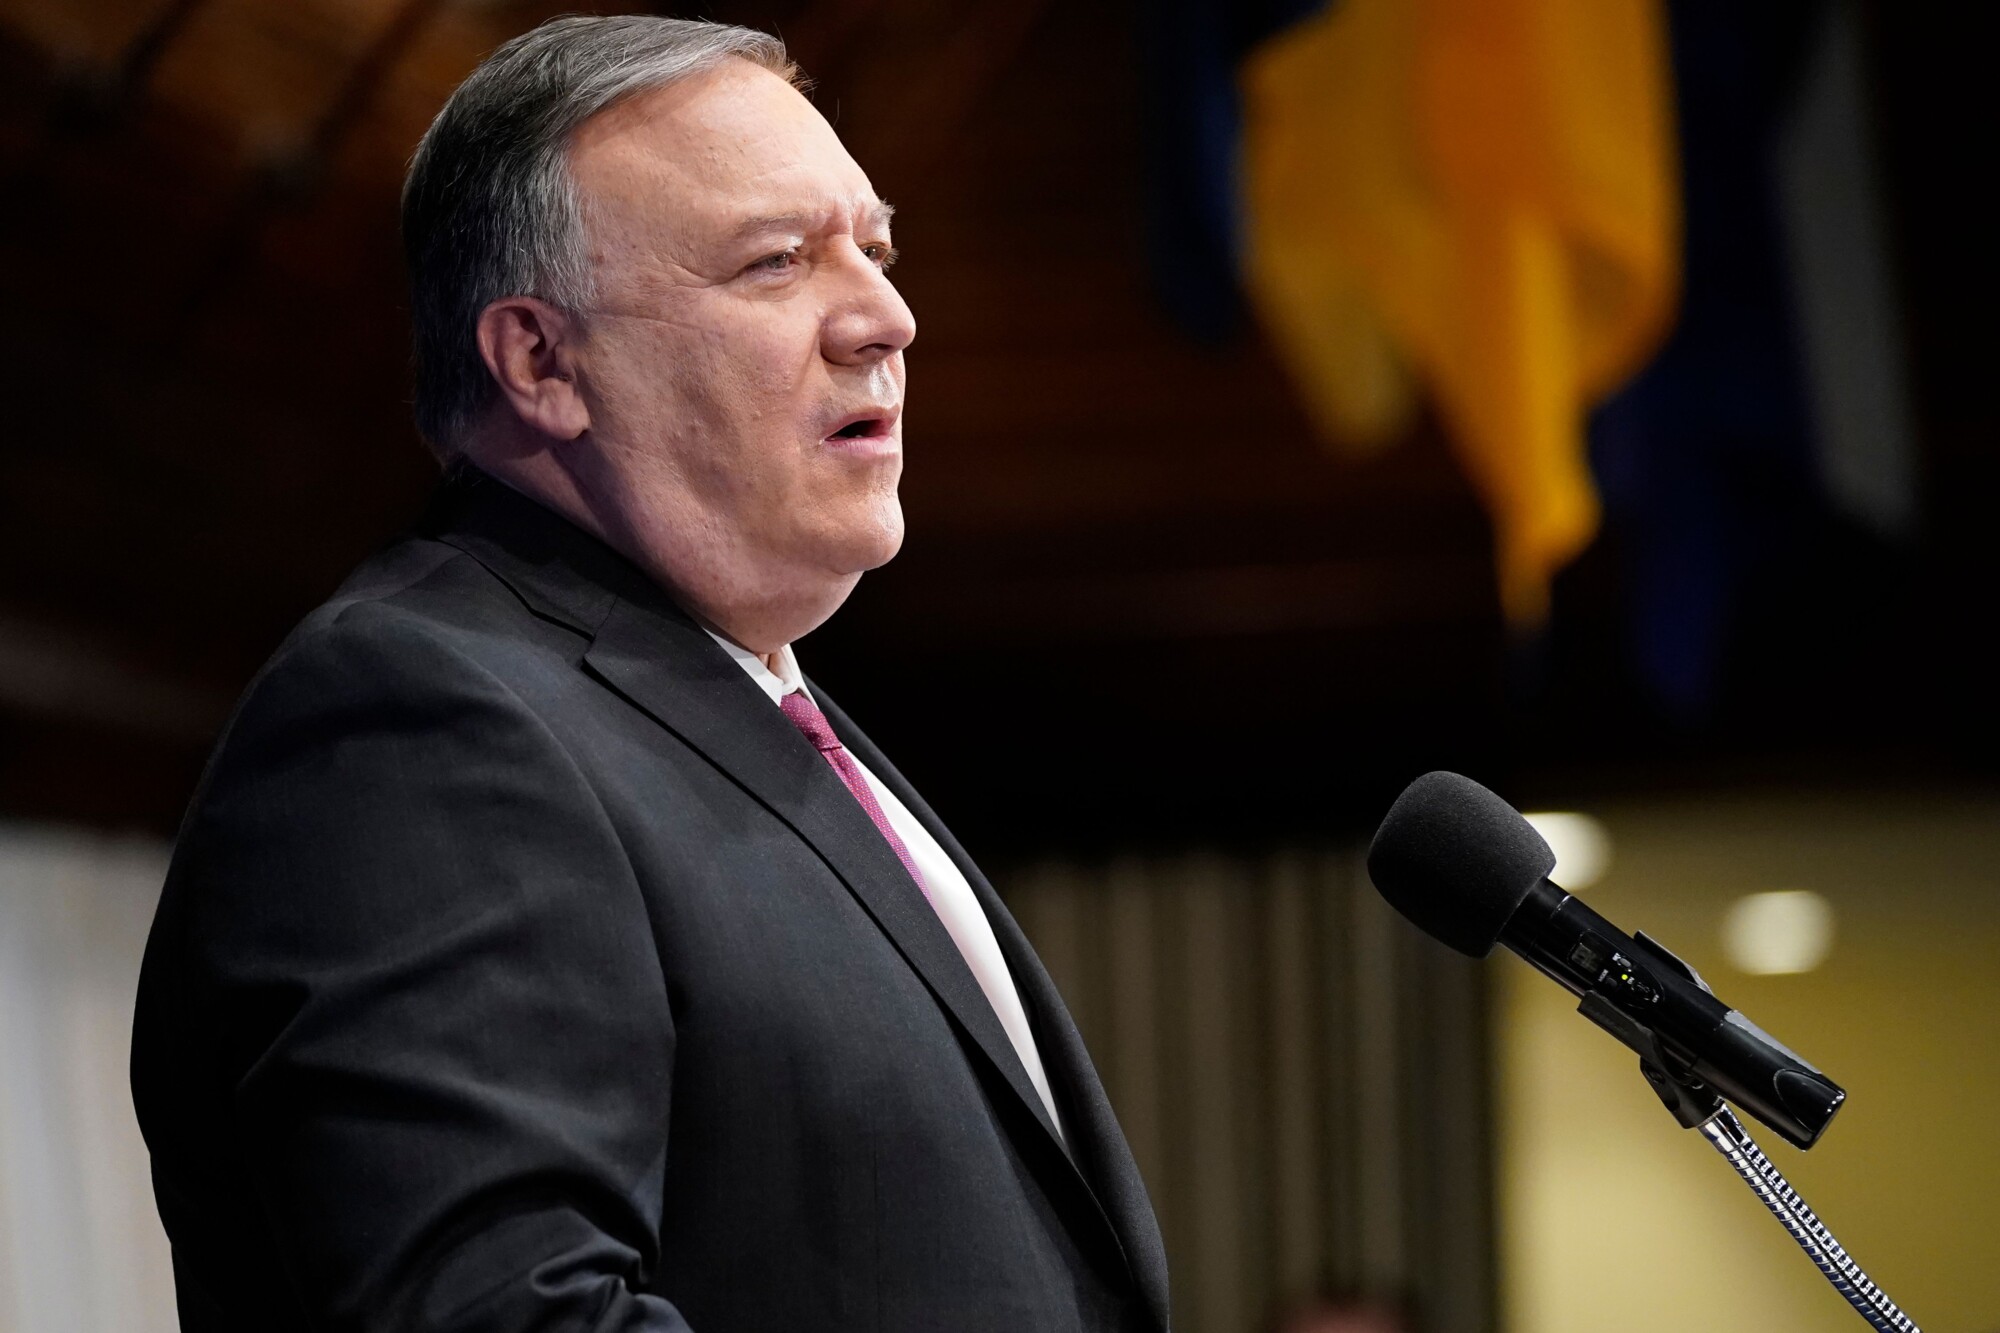 Pompeo Calls on Biden to Confront CCP After Memo Release